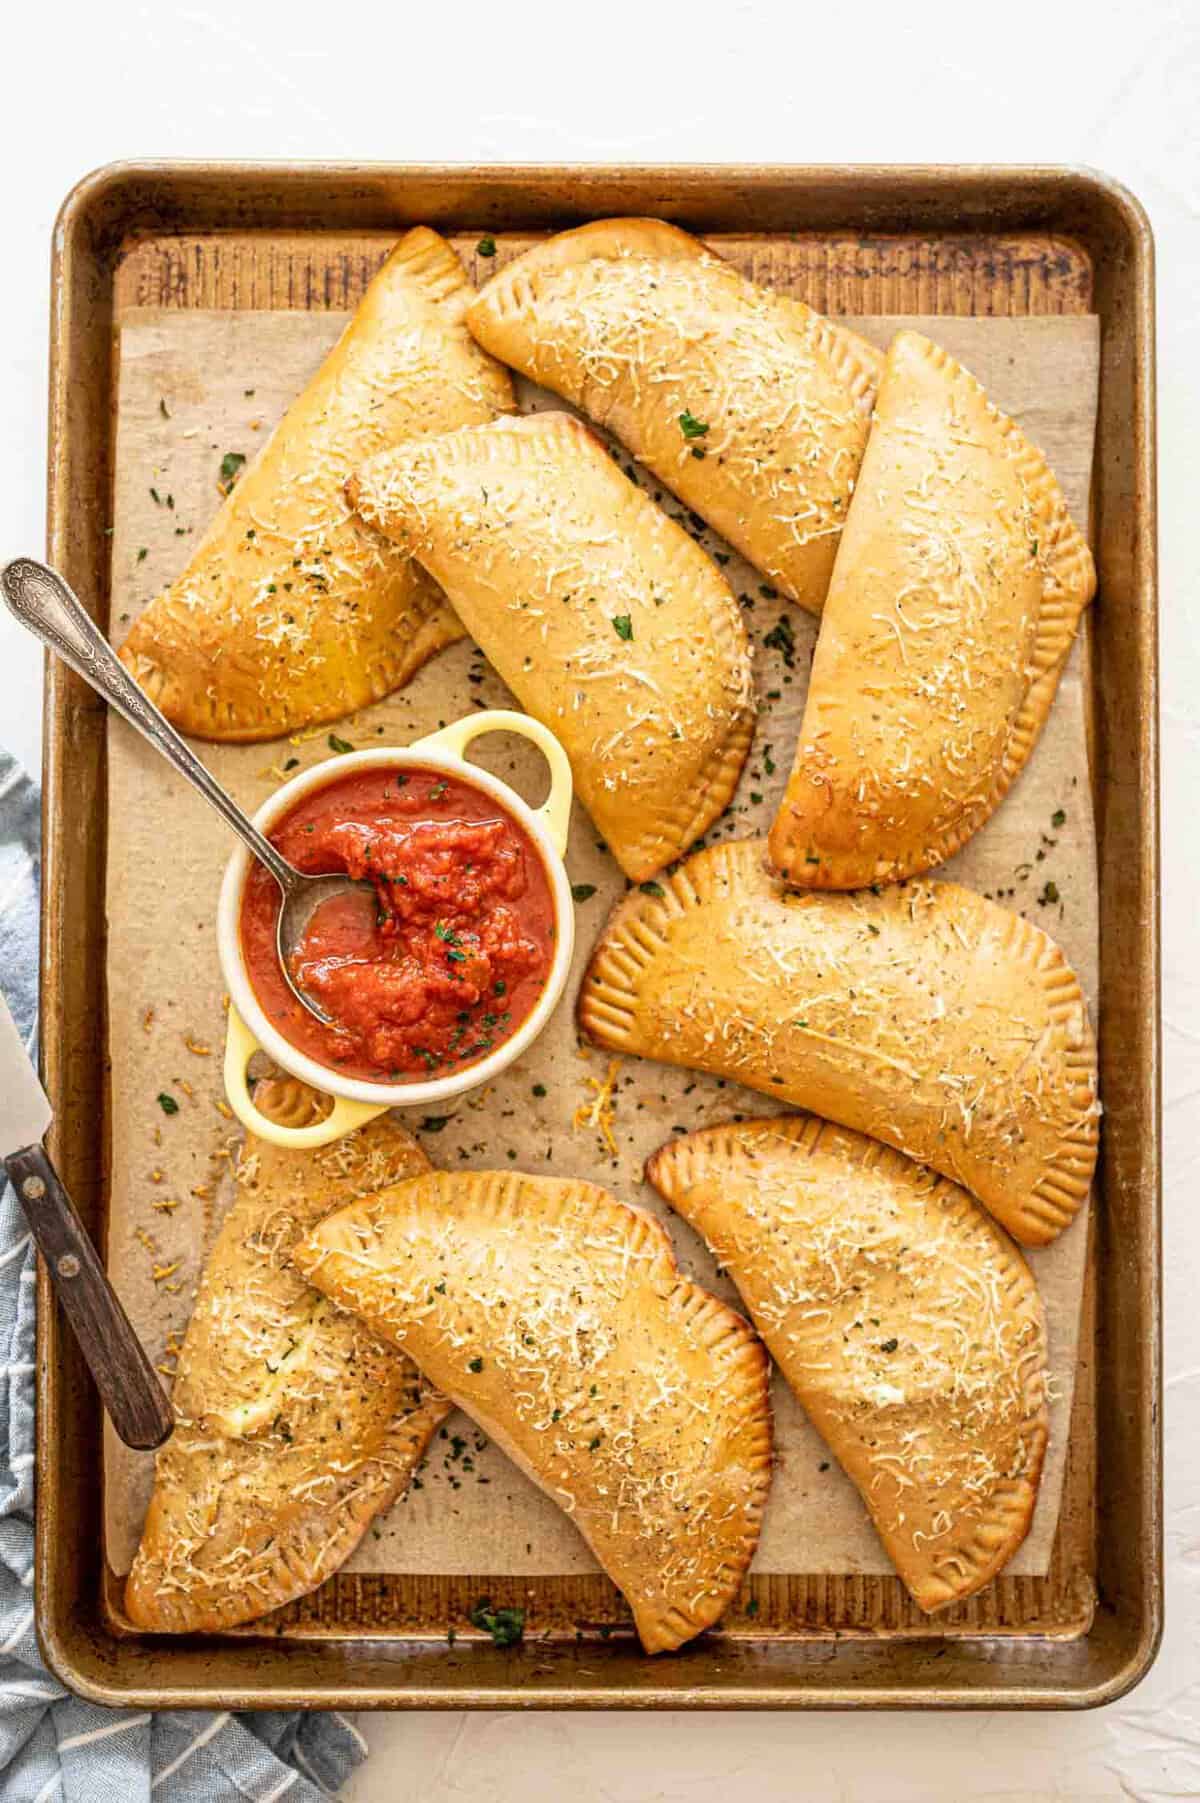 Calzones on baking sheet after being baked with Parmesan and parsley sprinkled on top.